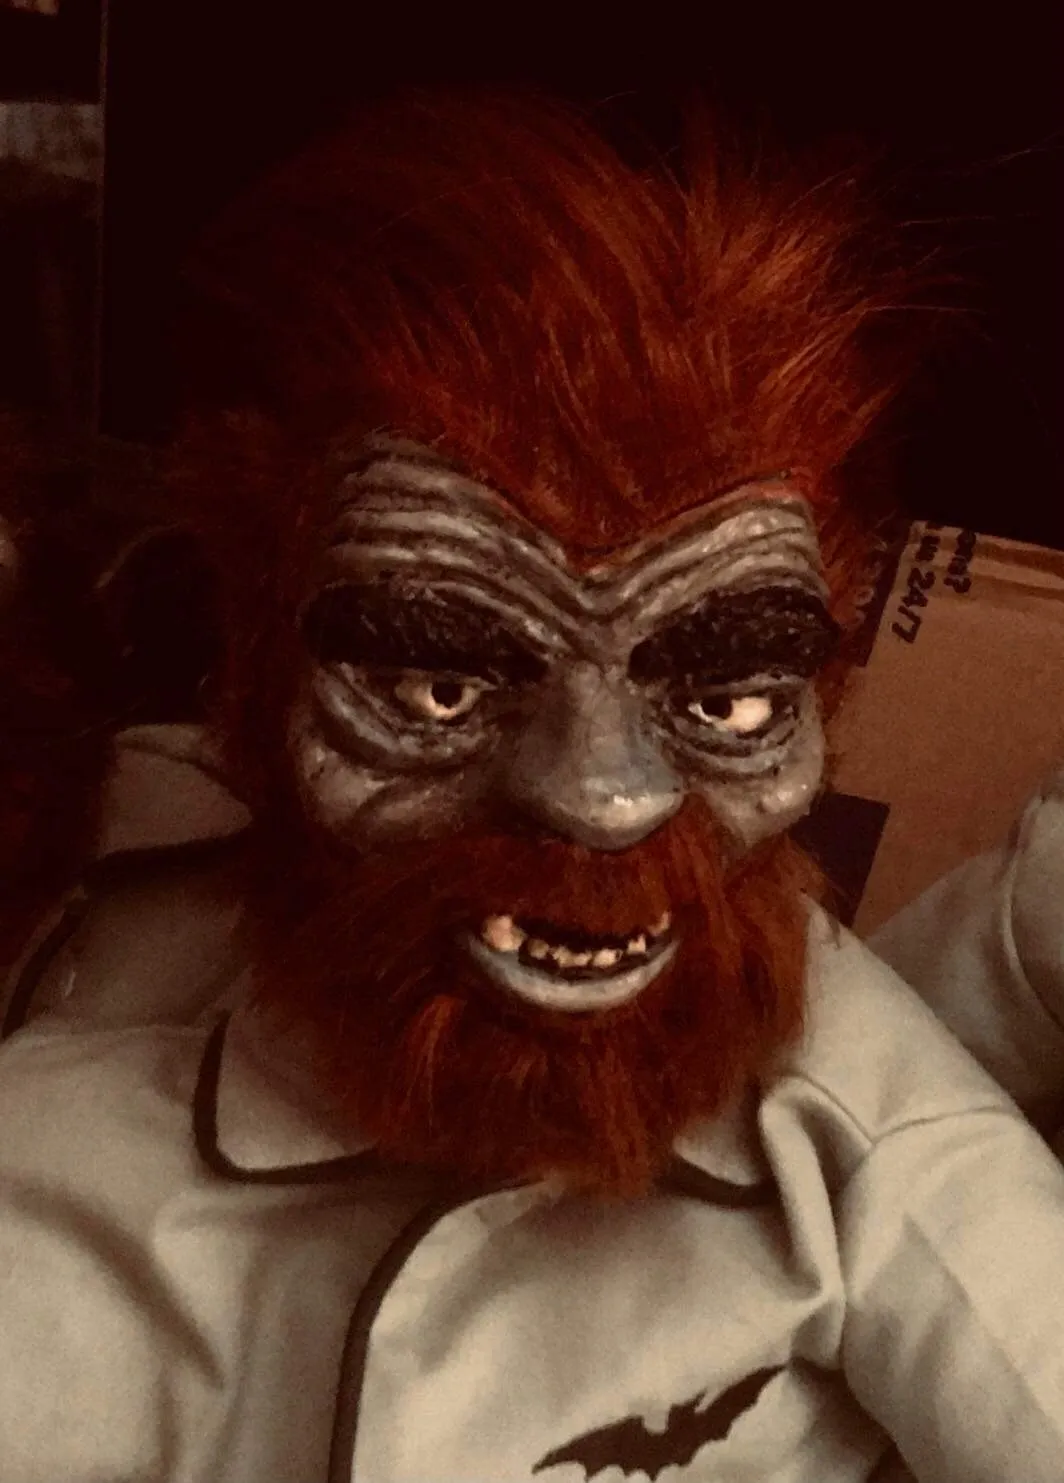 A man with red hair and a beard wearing a mask.